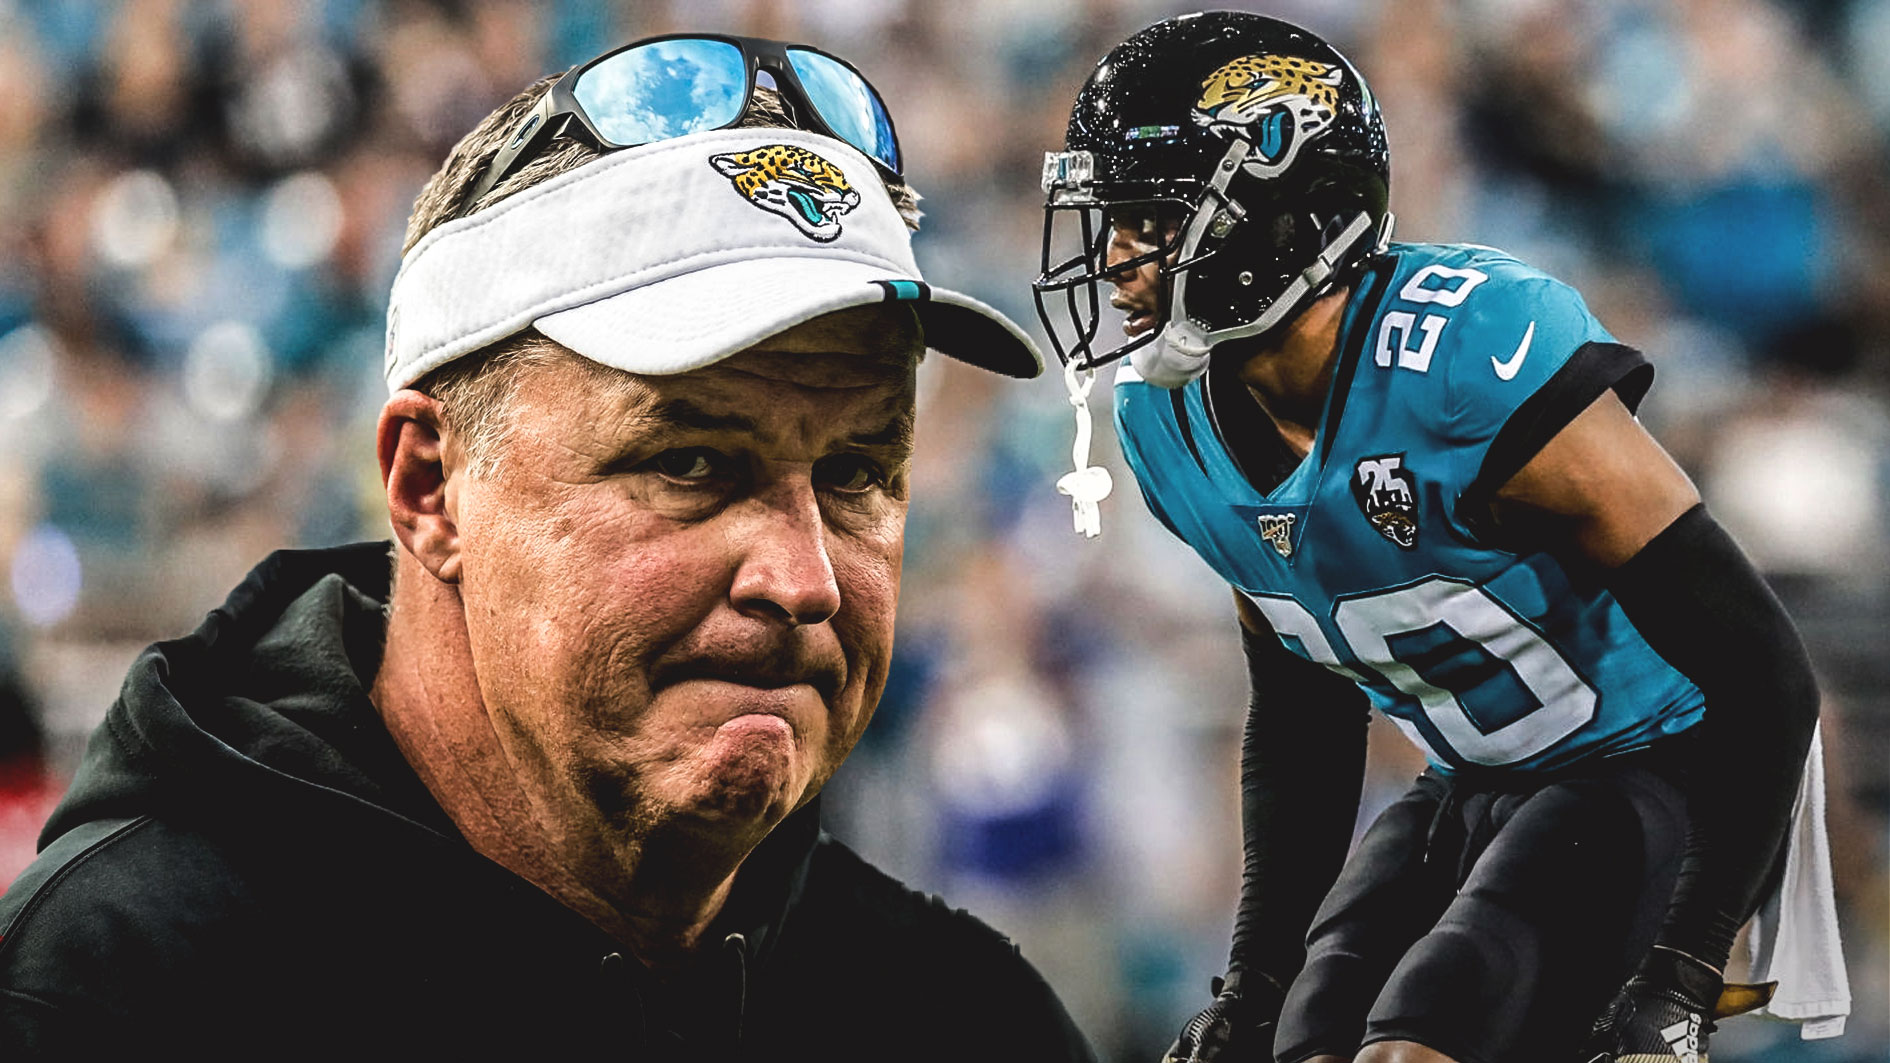 Issues between Ramsey and Jaguars